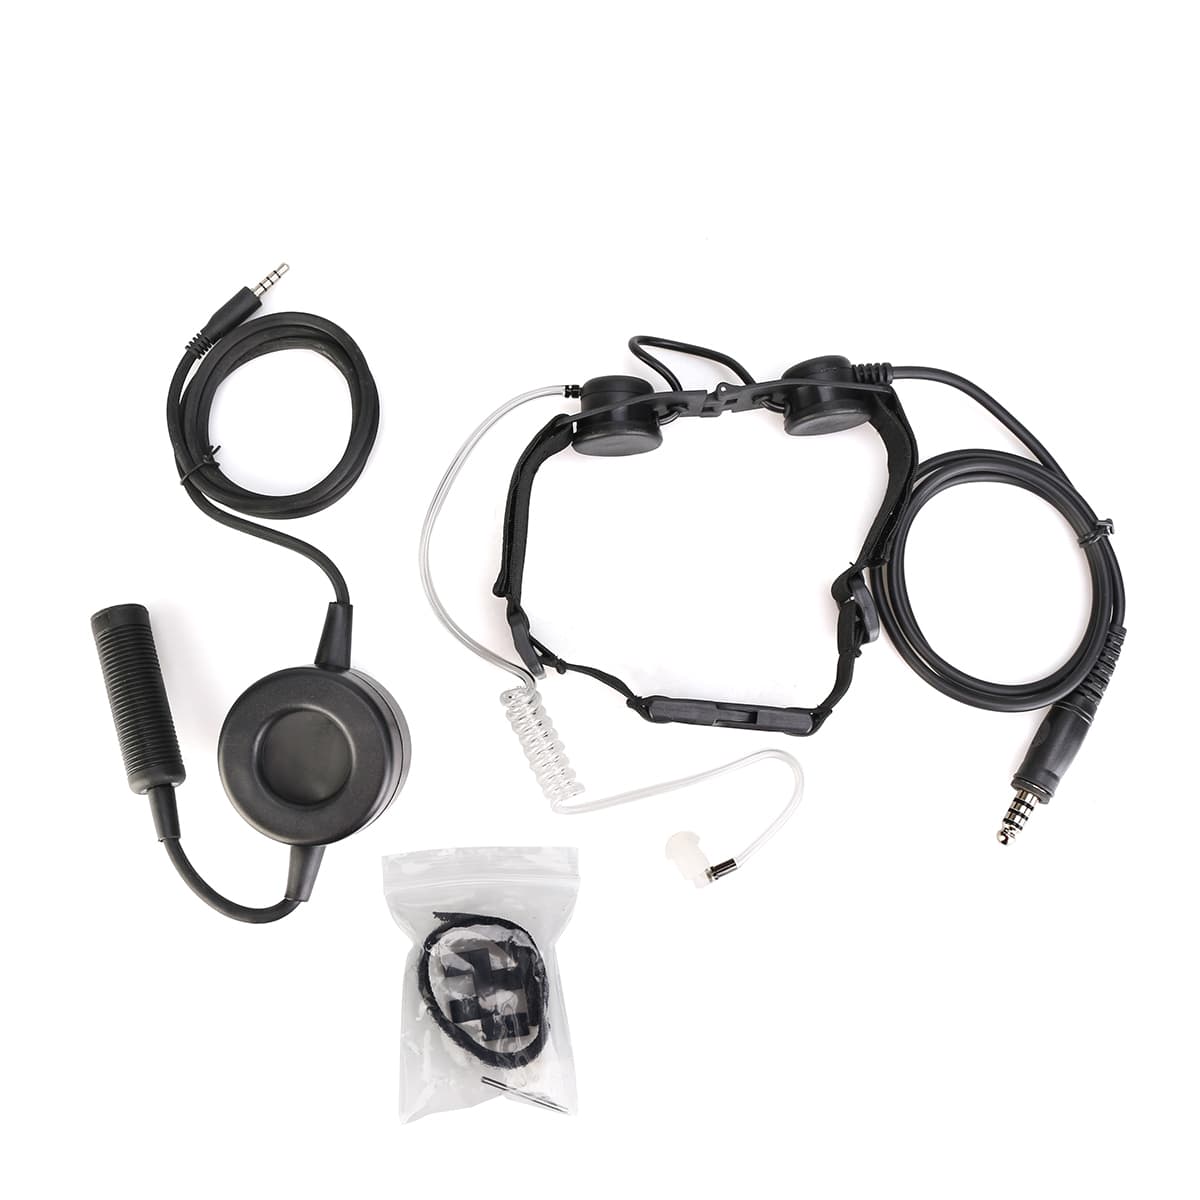 3.5mm Tactical Throat Microphone IP54 PTT for Cellphone